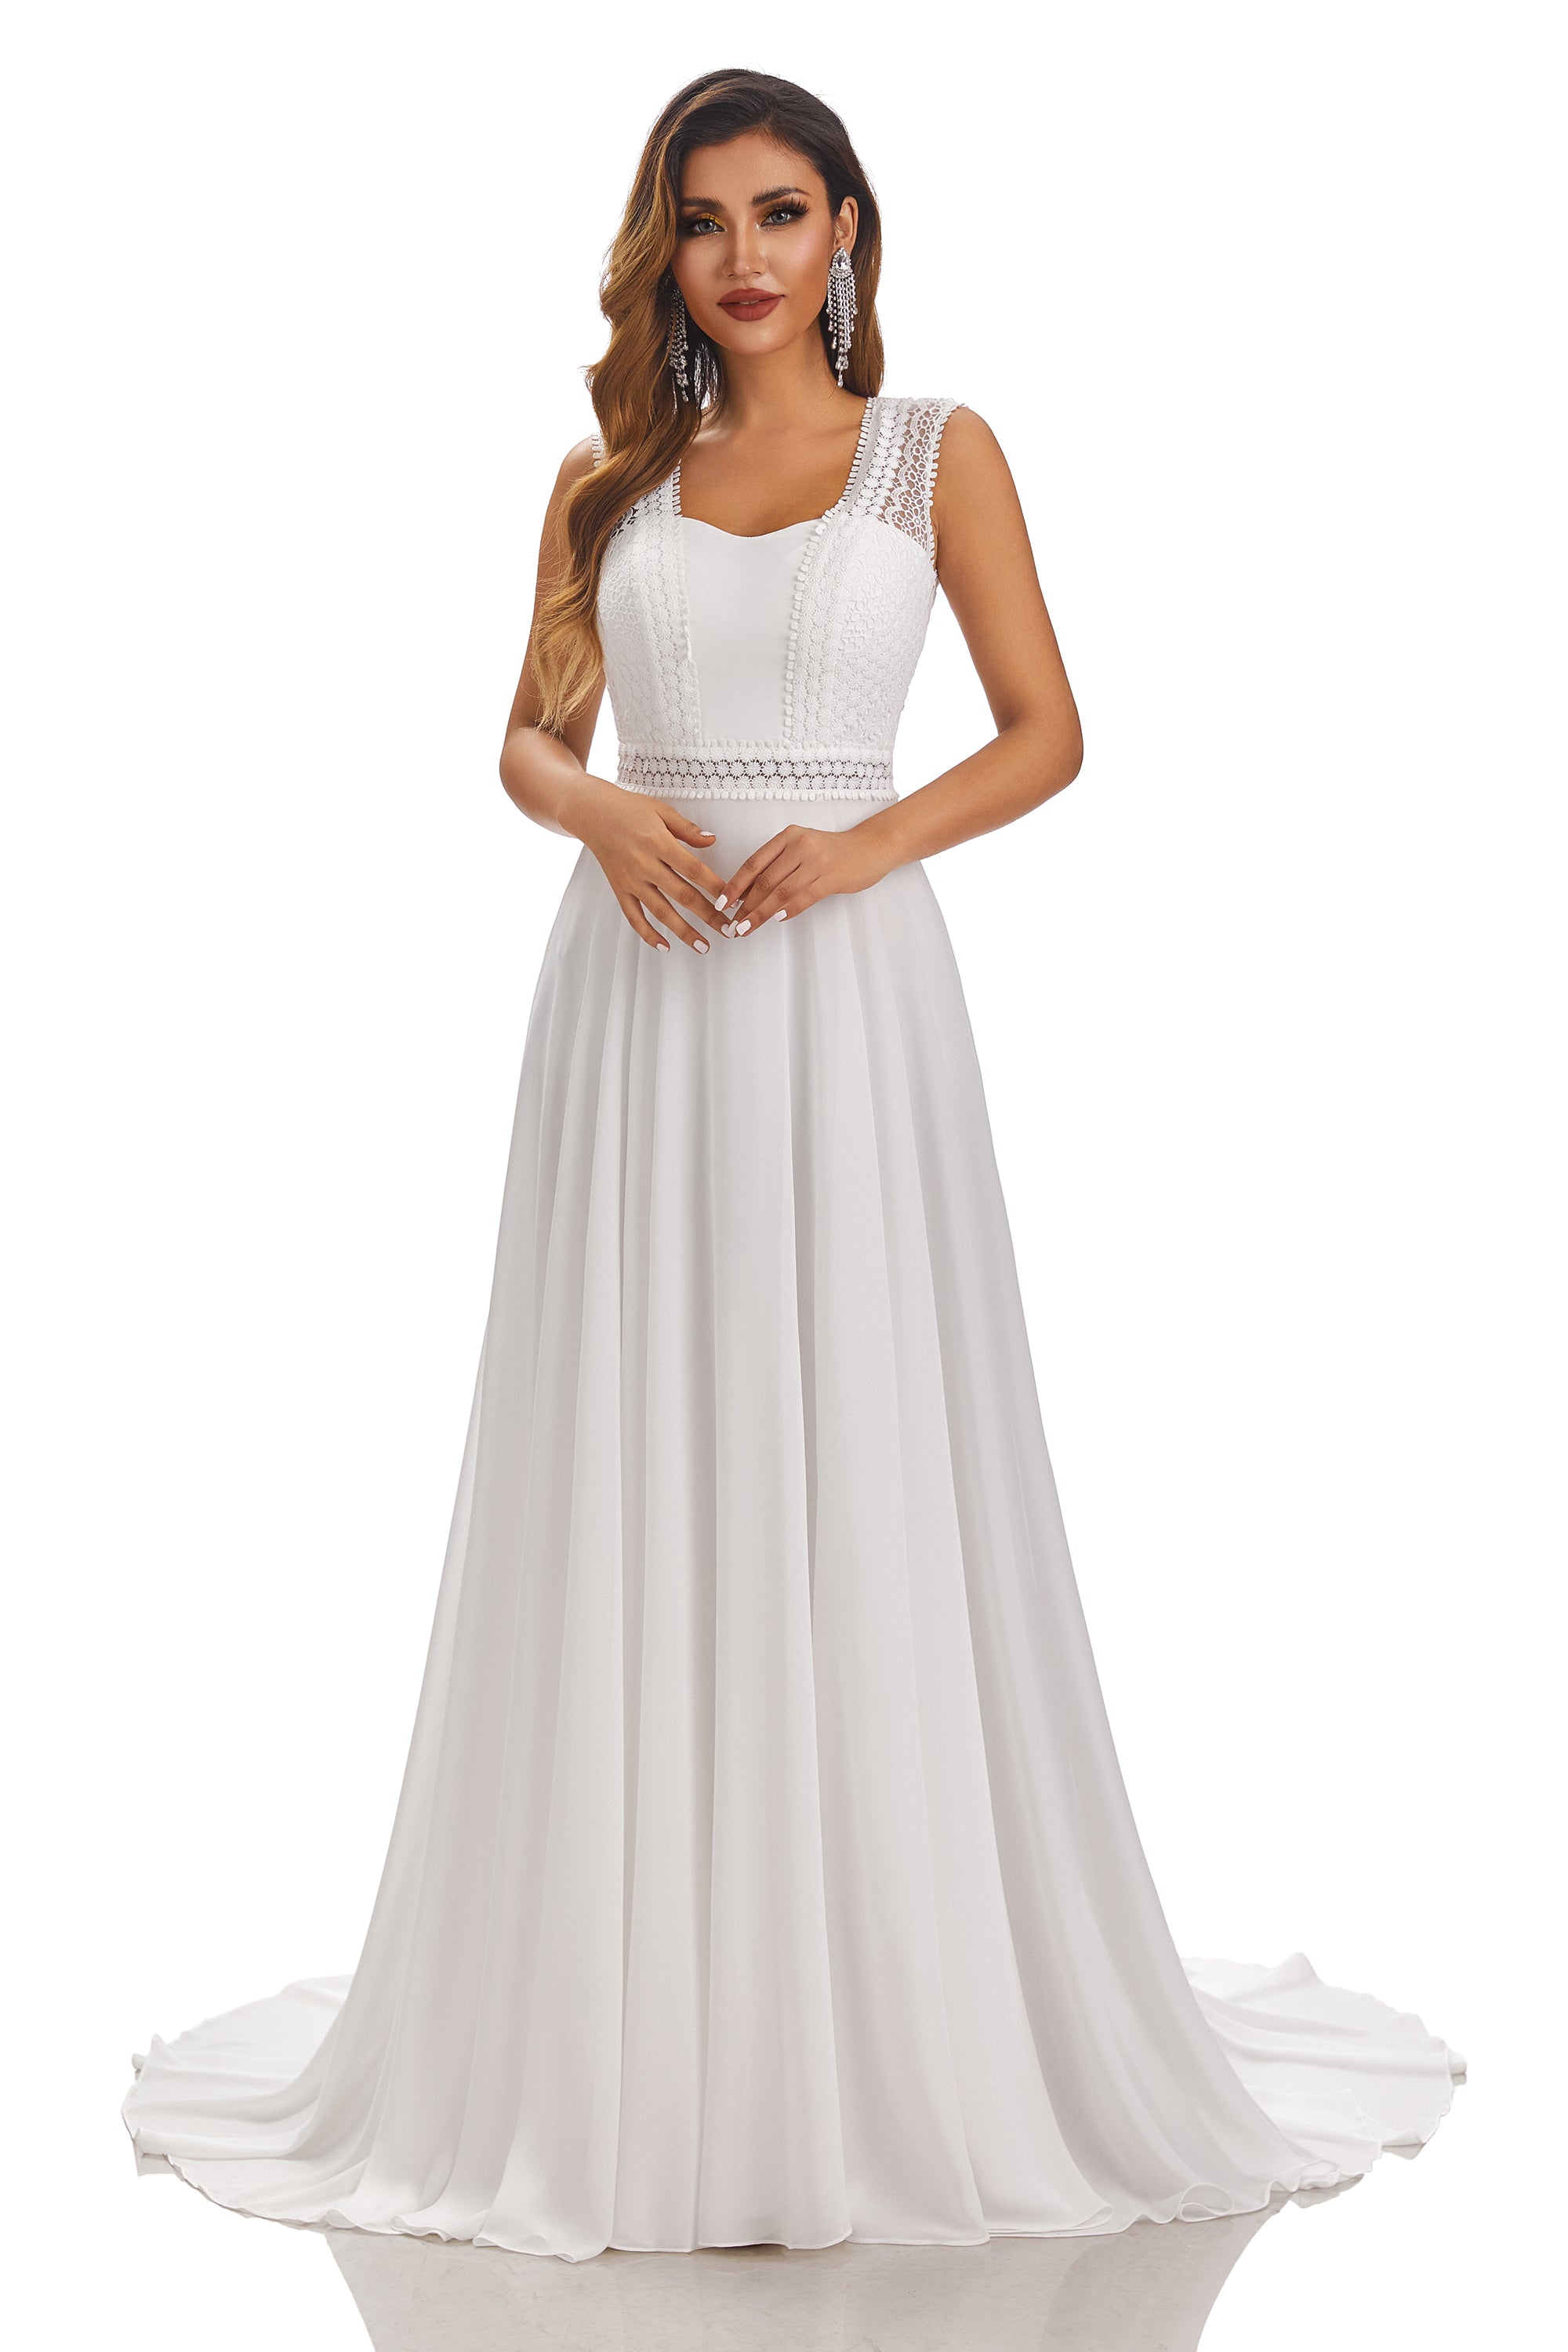 Simple A-Line Sleeveless Chiffon Wedding Dress With Lace Appliques